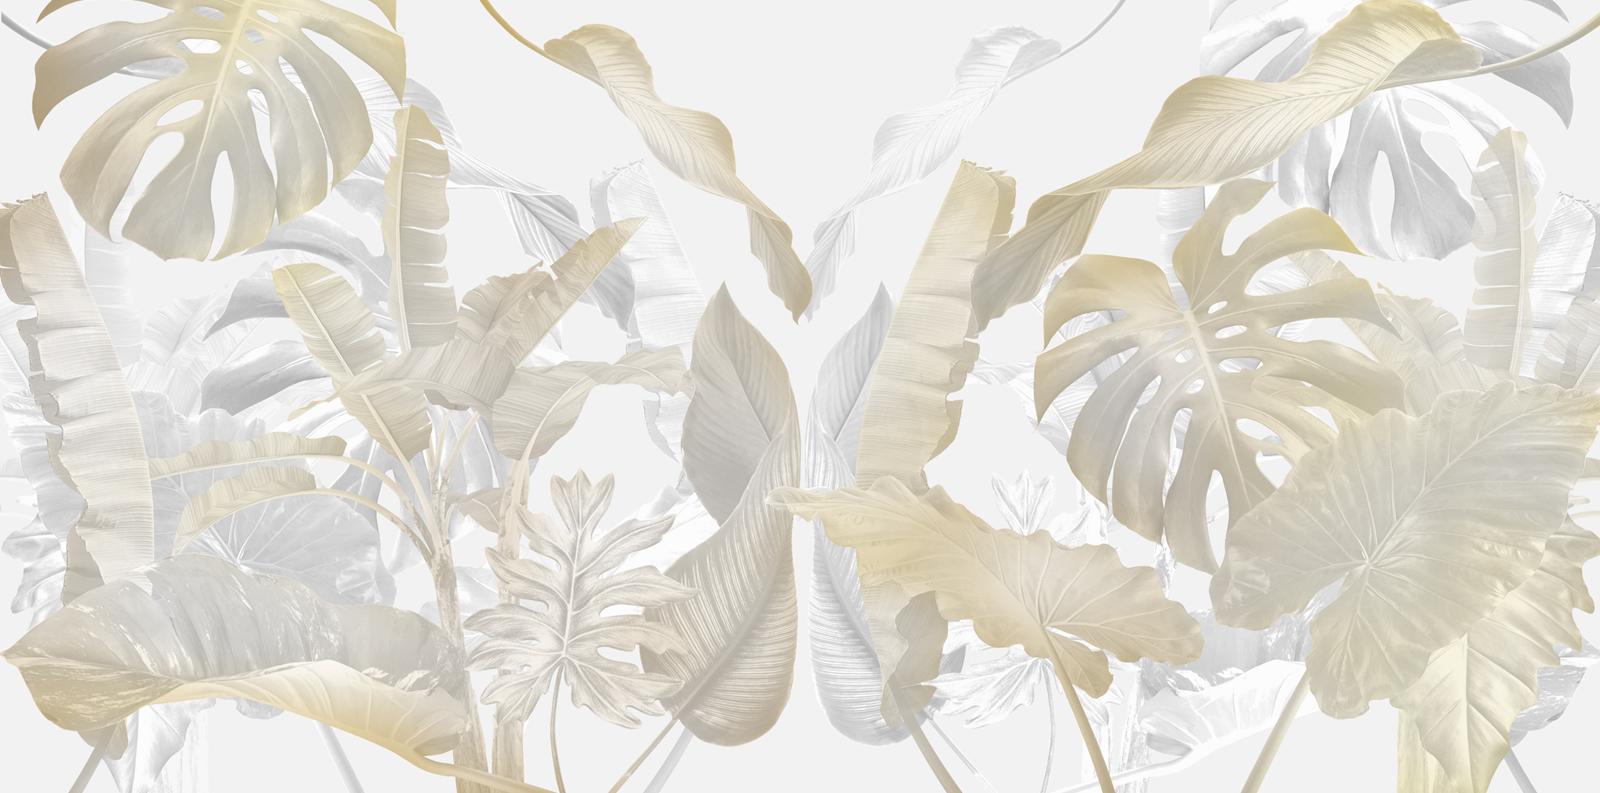 Contemporary EDGE Collections JungleScape Daylight;  a whimsical nod to endless Summers For Sale